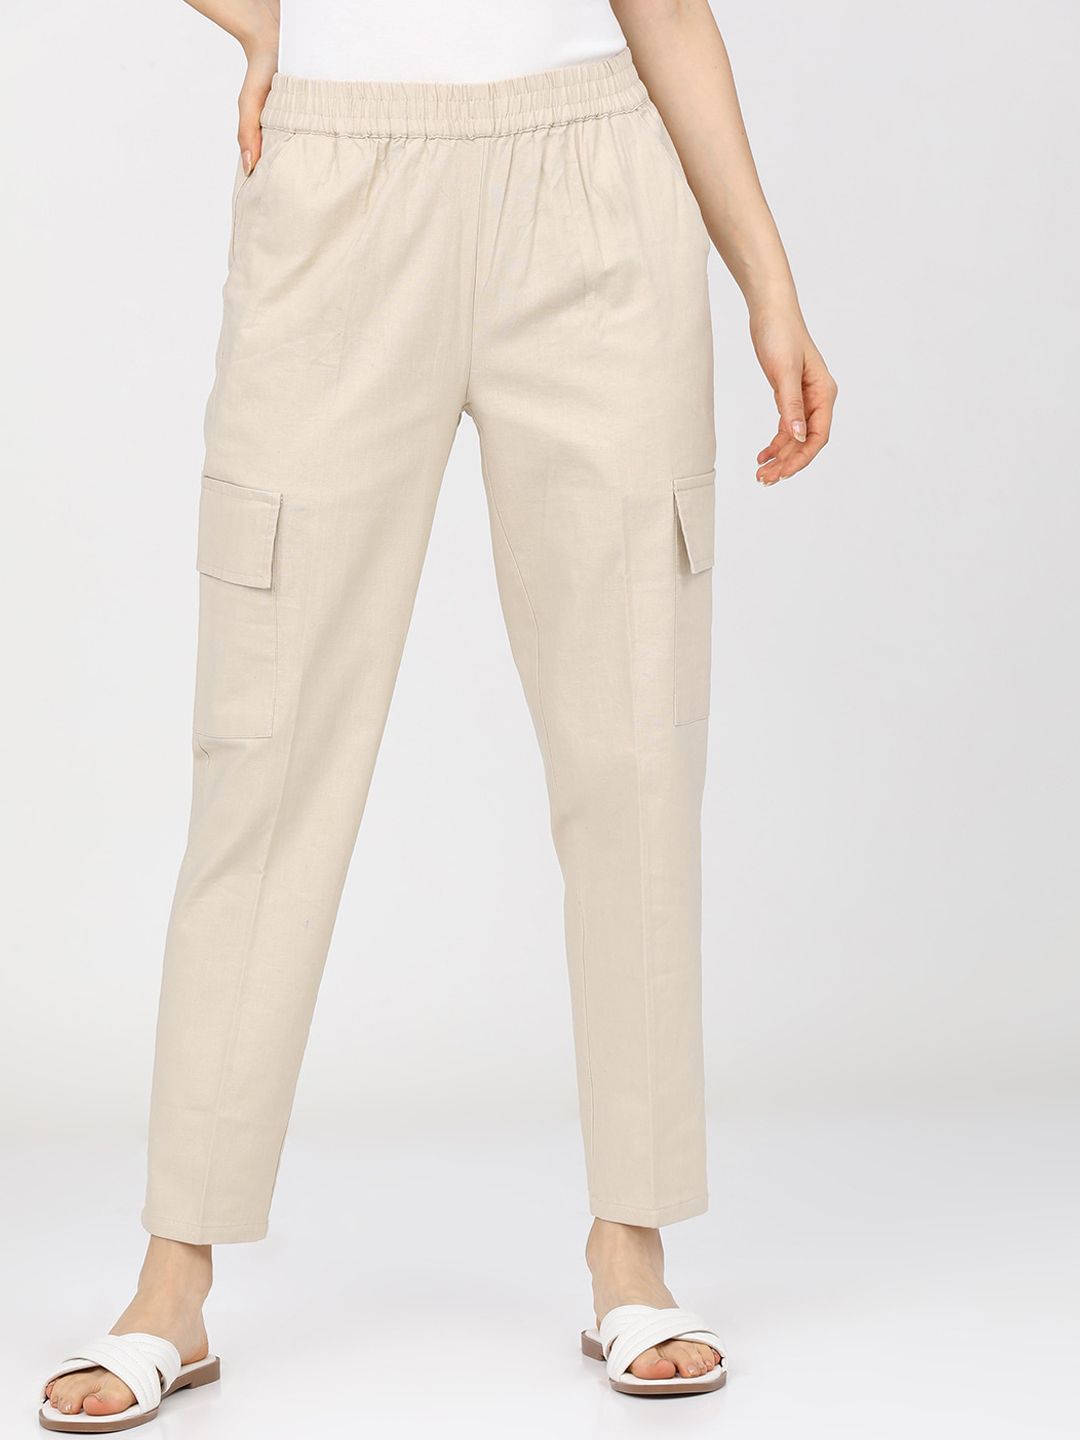 Tokyo Talkies Women Cream-Coloured Straight Fit Cargos Trousers Price in India